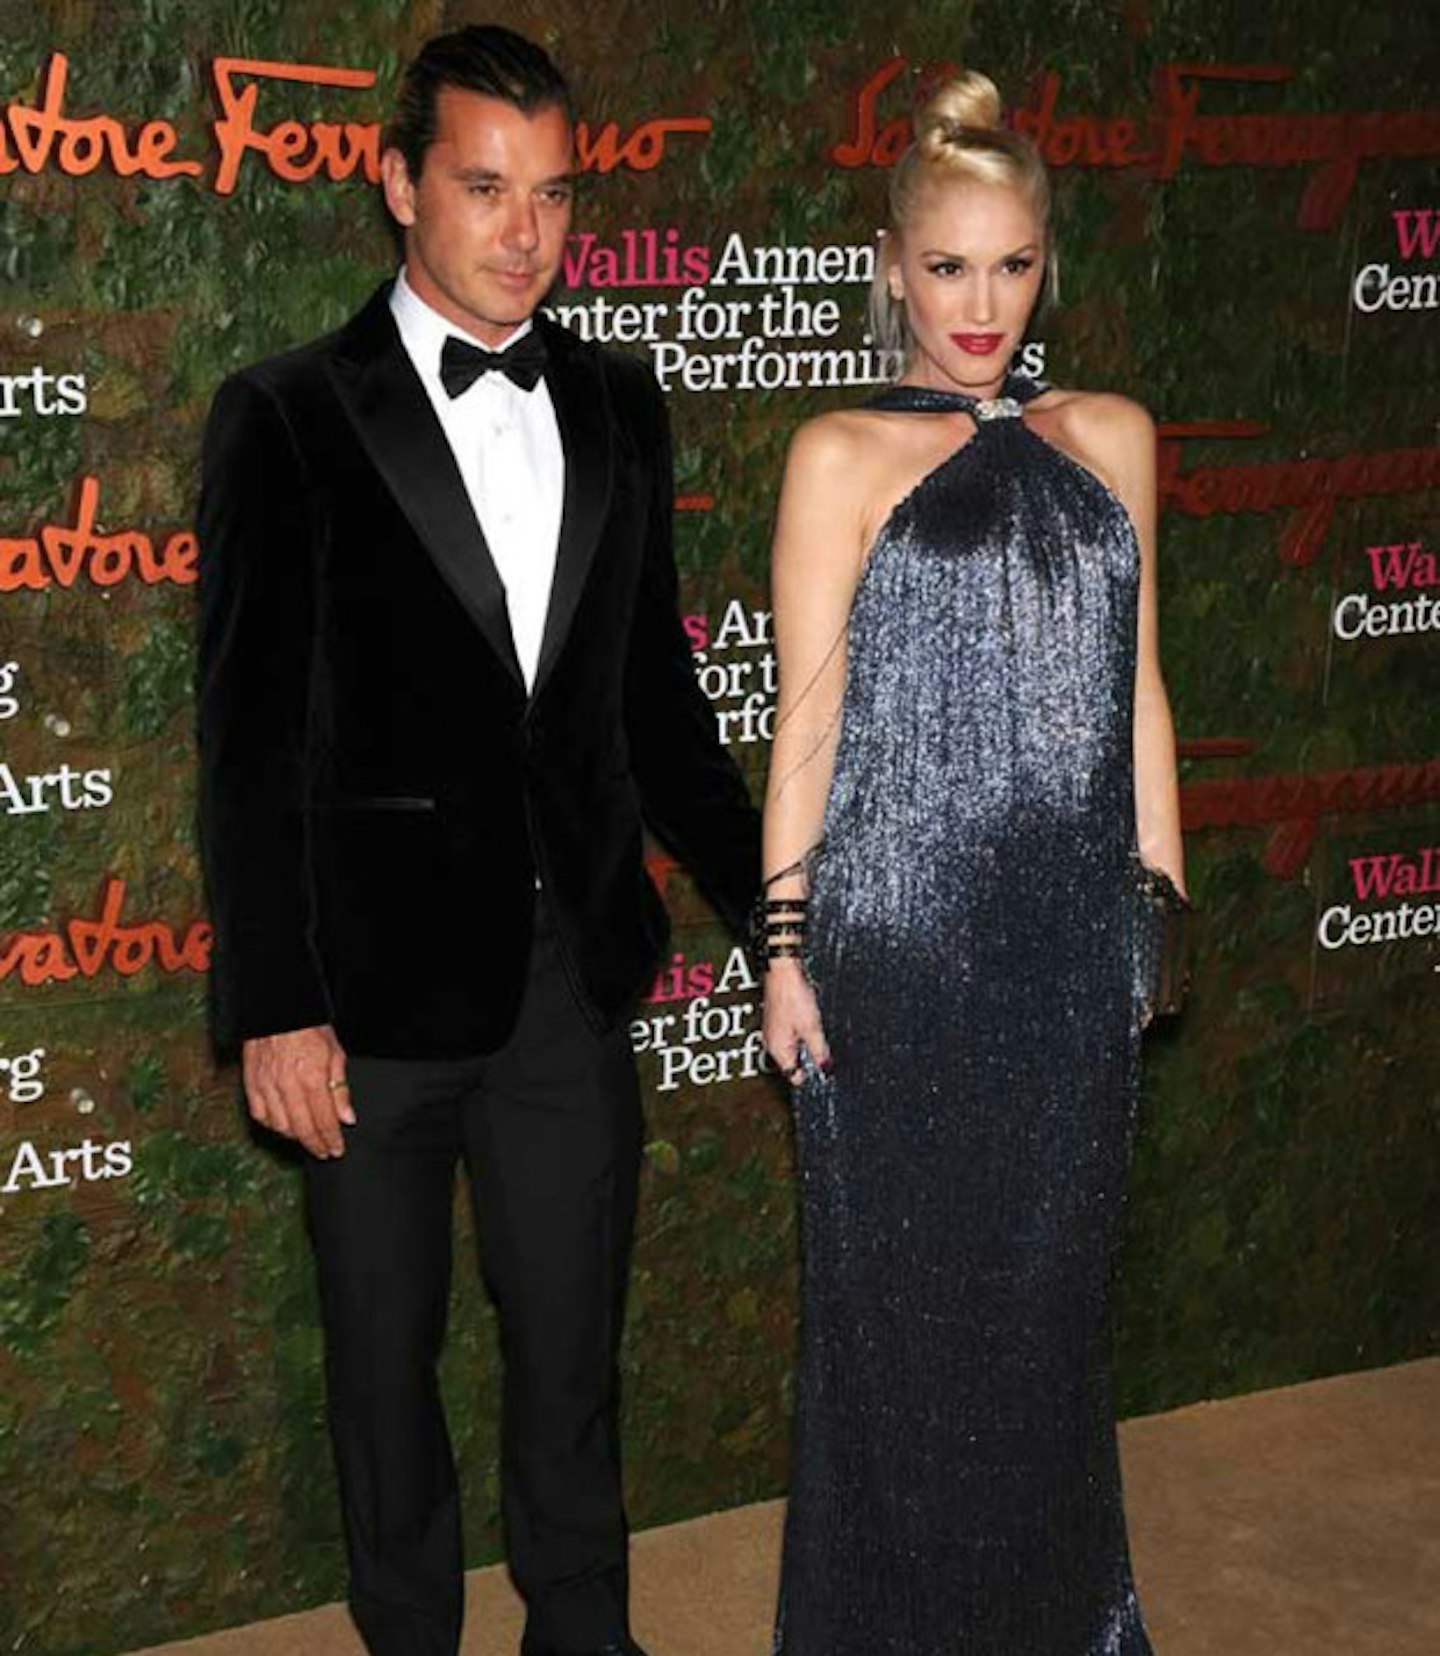 February 2014: Gwen Stefani and Gavin Rossdale welcomed son Apollo